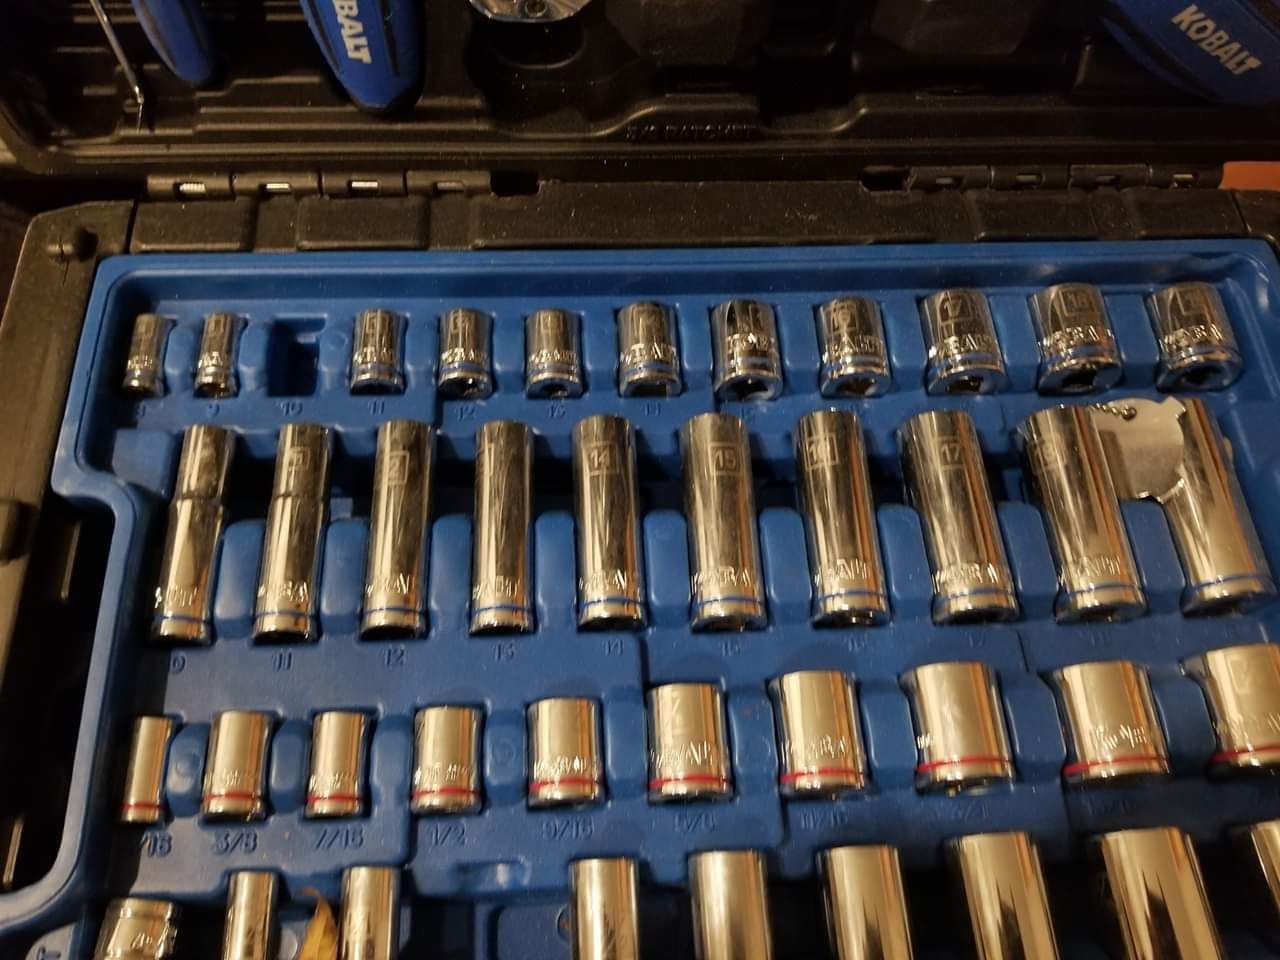 Bought my son a 300 piece tool kit and a tool box for his 15th birthday. I stole his 10mm. He needs to learn the struggle is real.